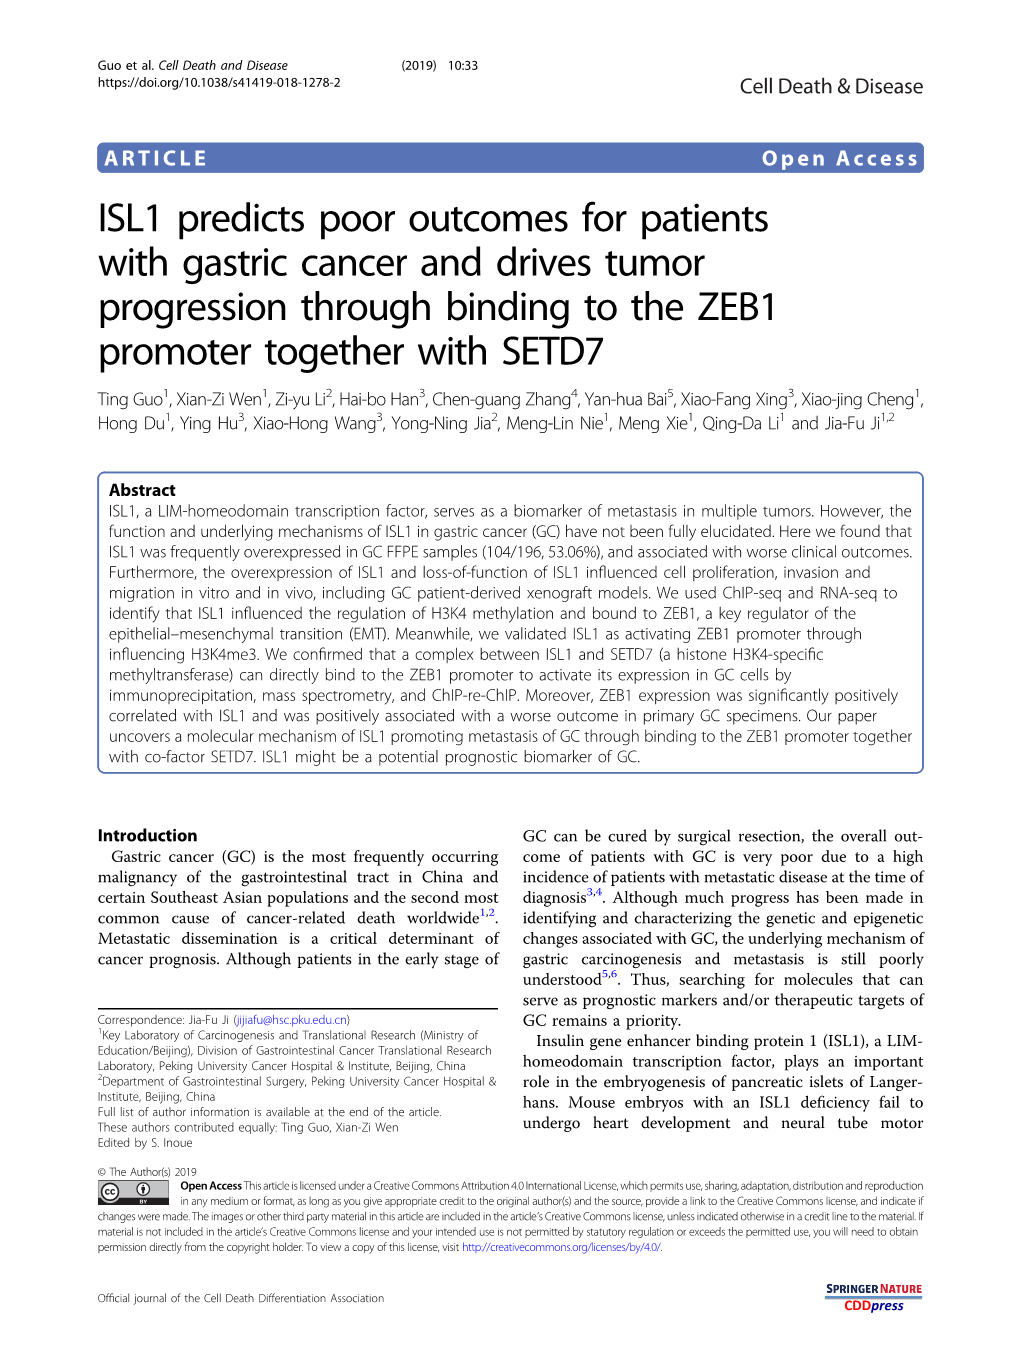 ISL1 Predicts Poor Outcomes for Patients with Gastric Cancer And